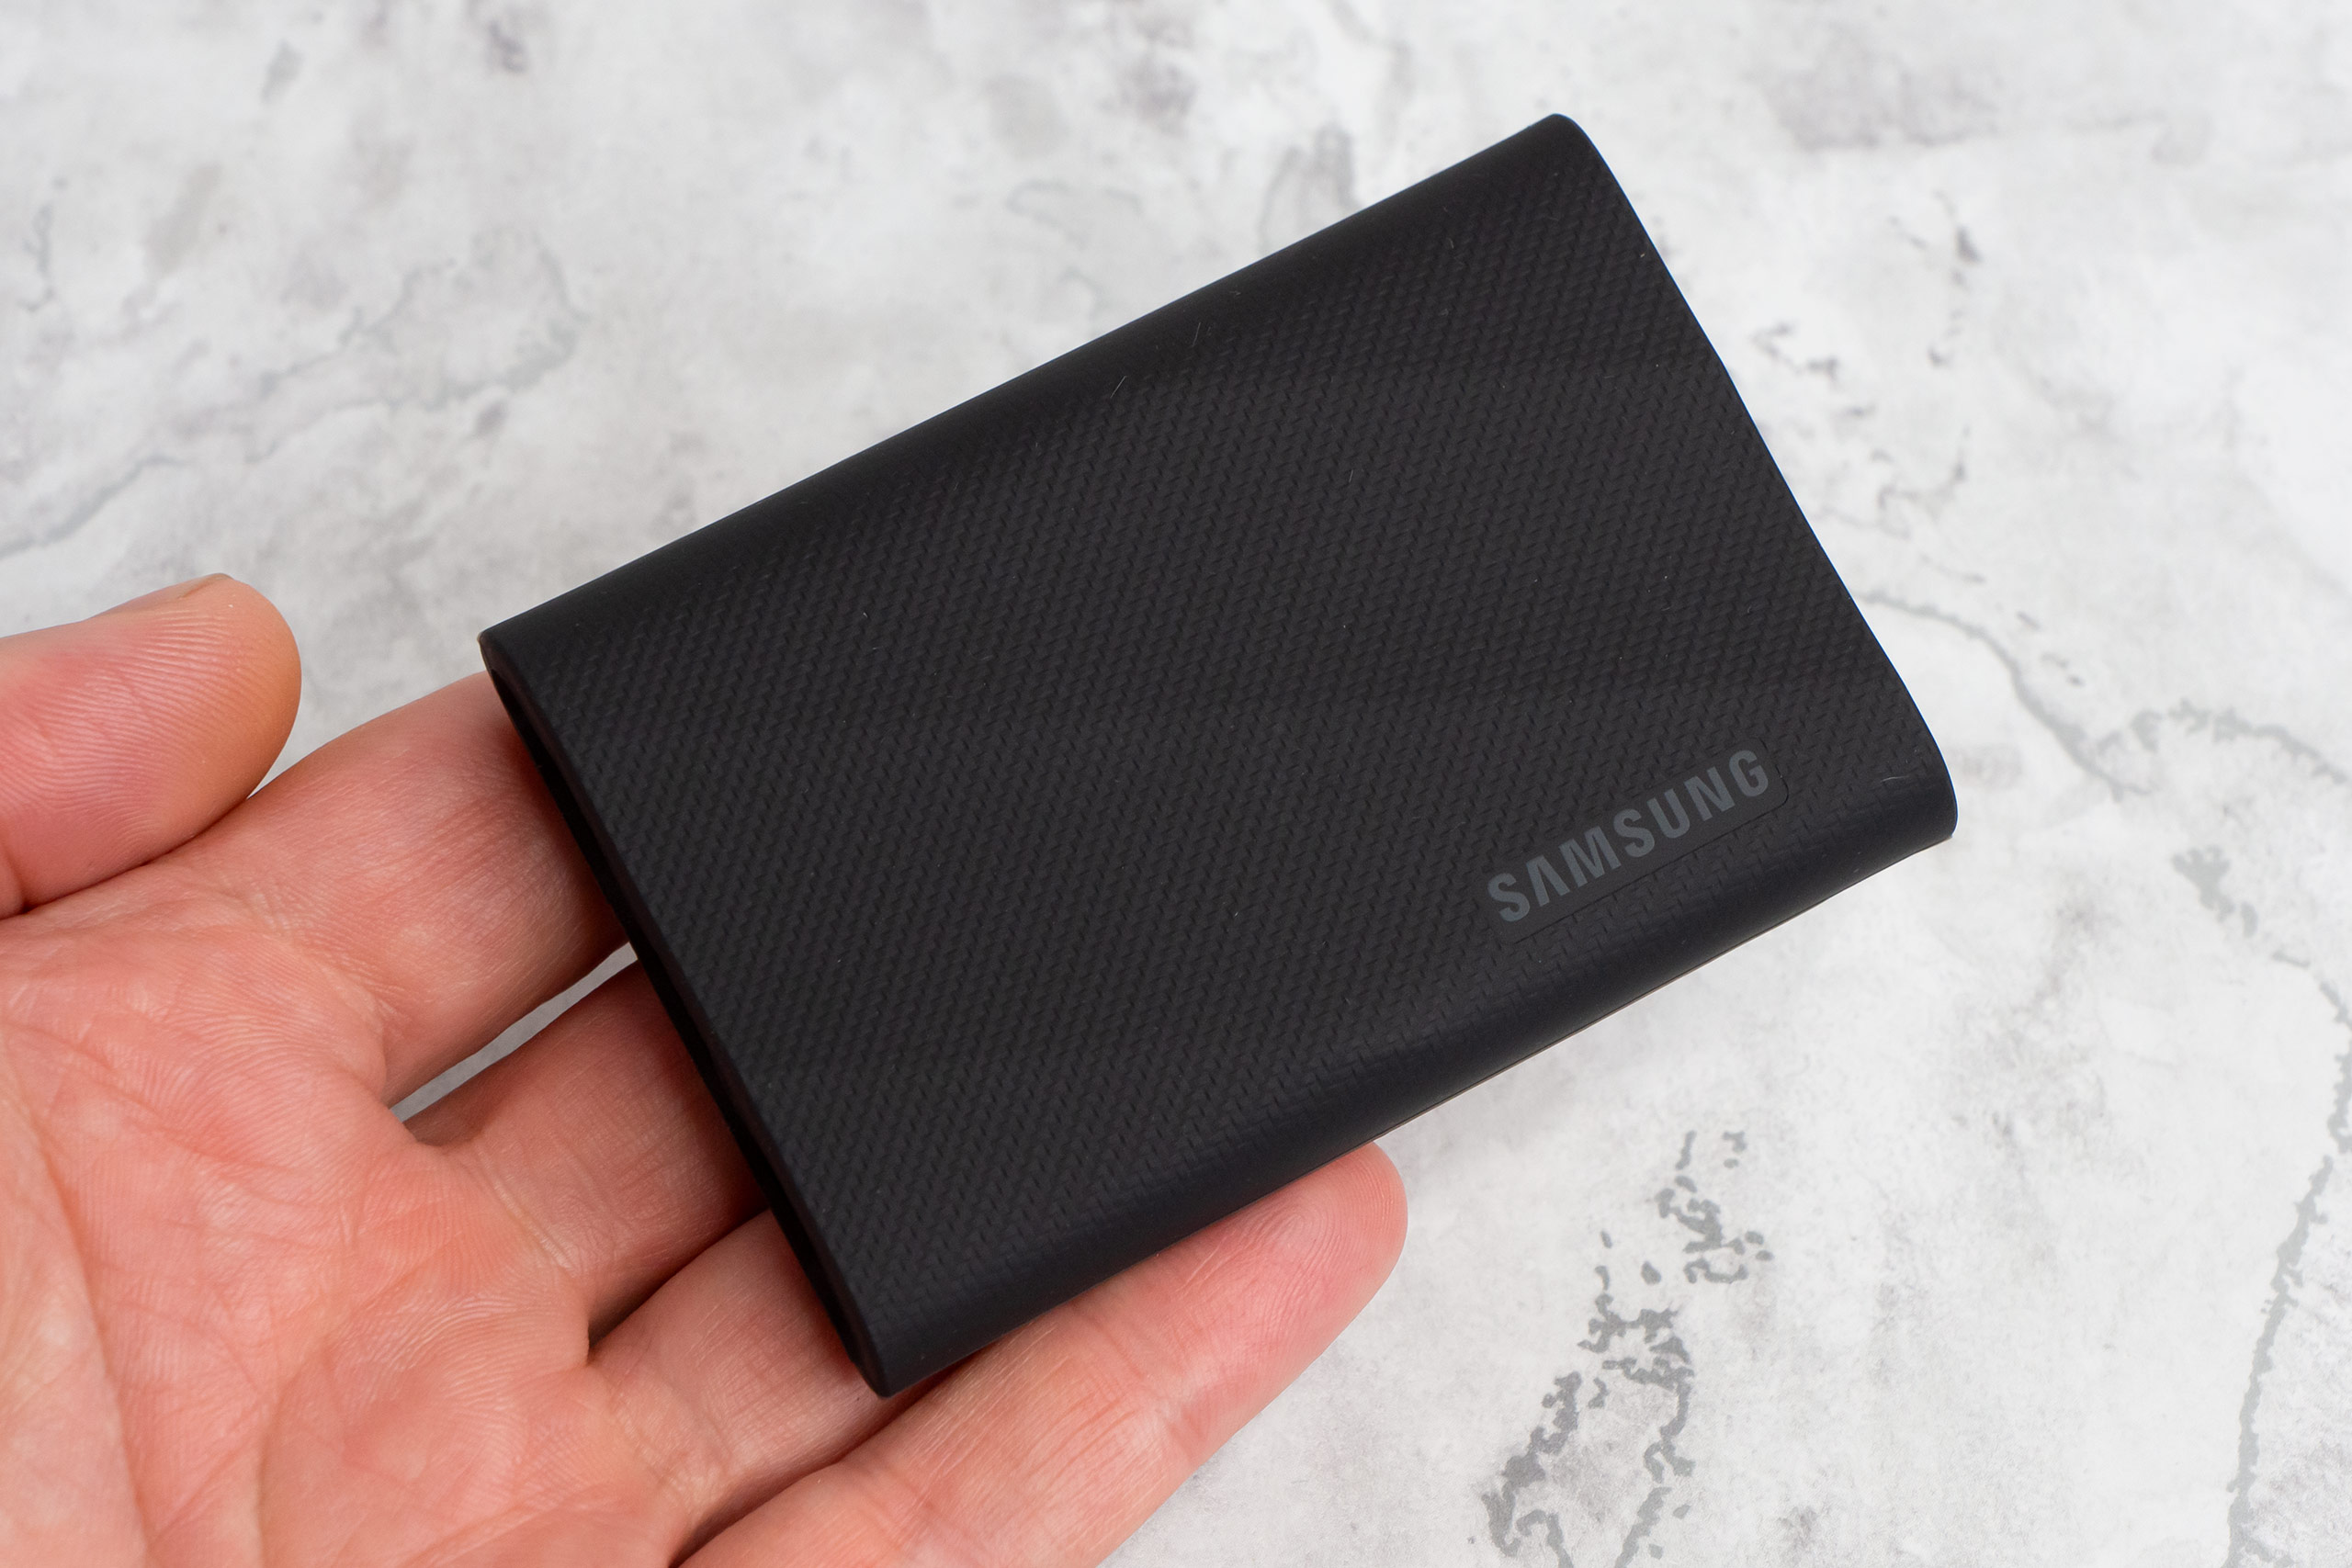 Samsung T9 2 TB Portable Solid State Drive - External - Black 